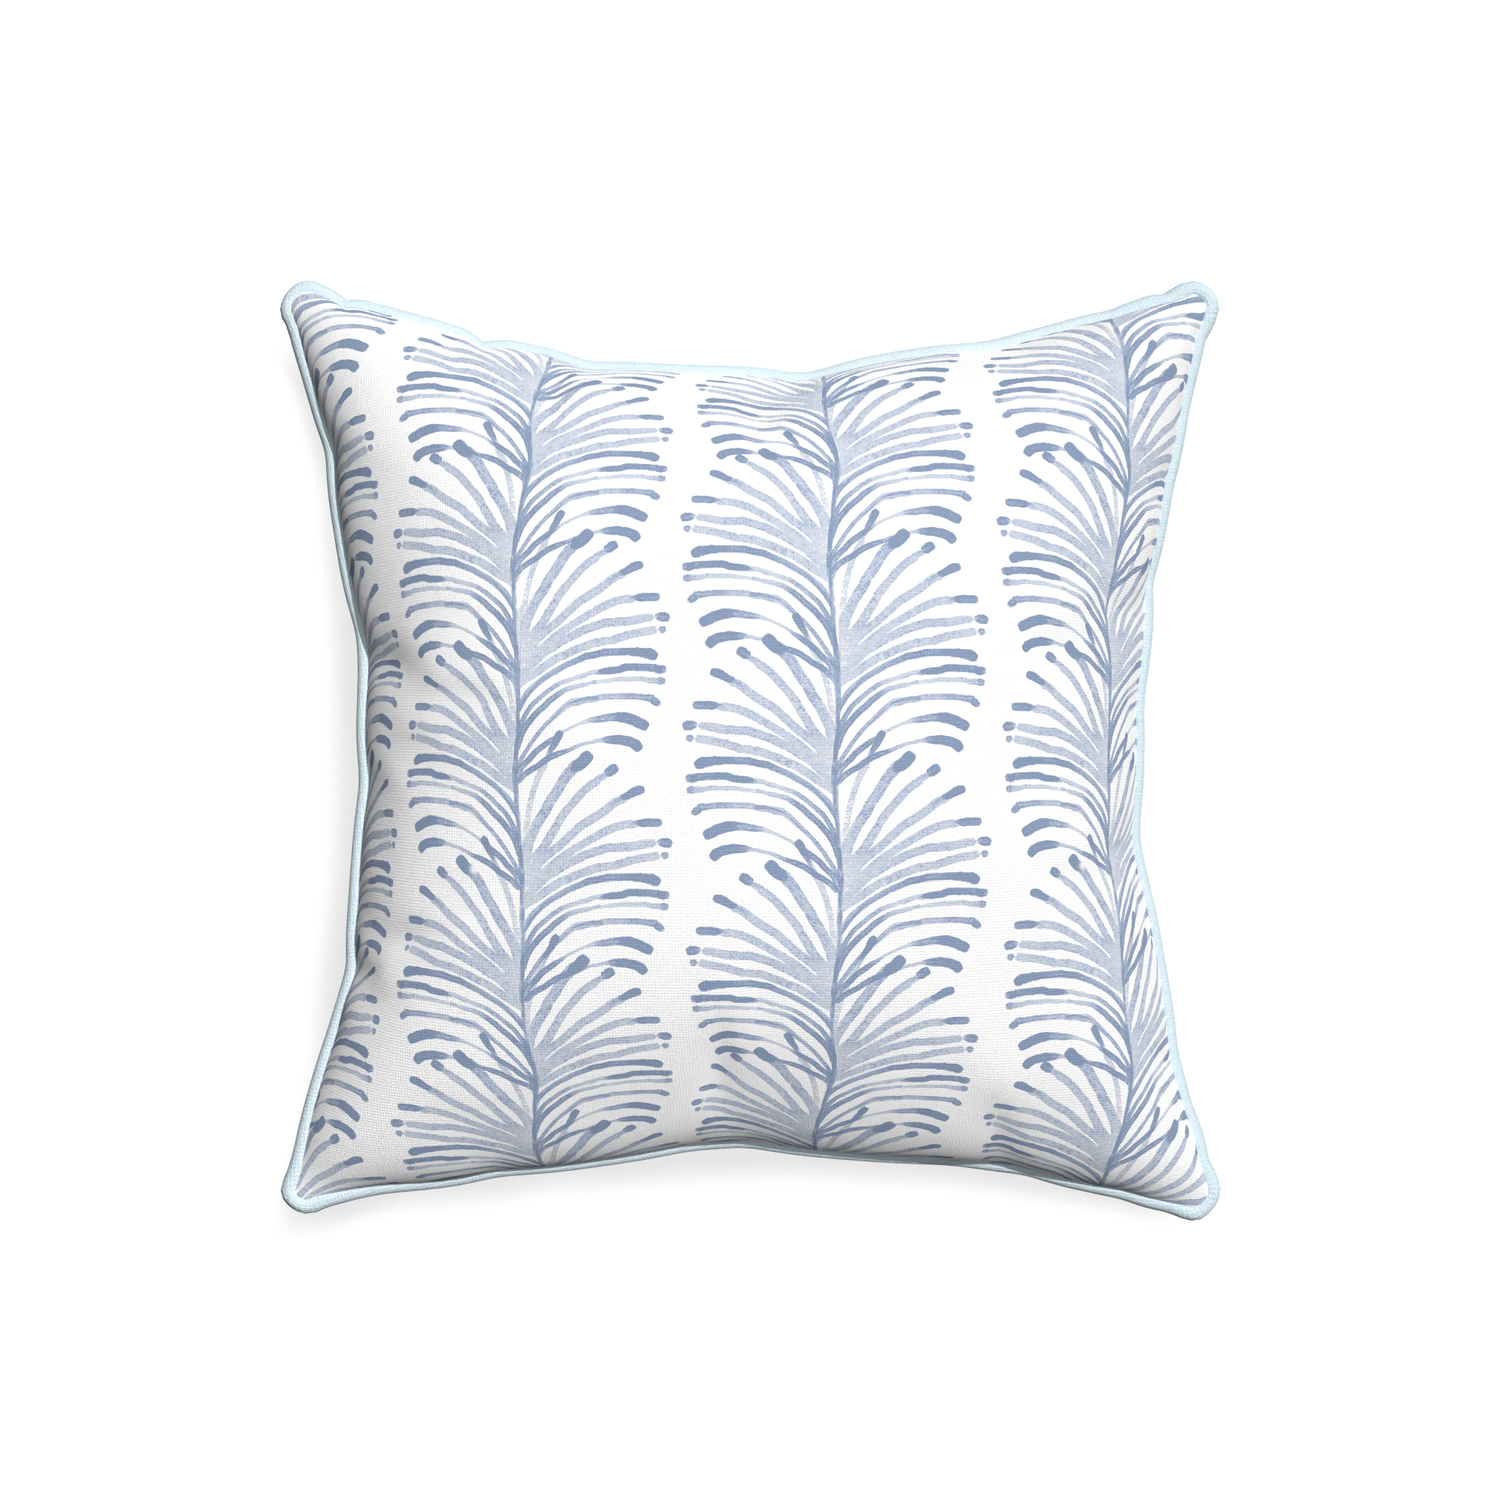 20-square emma sky custom sky blue botanical stripepillow with powder piping on white background